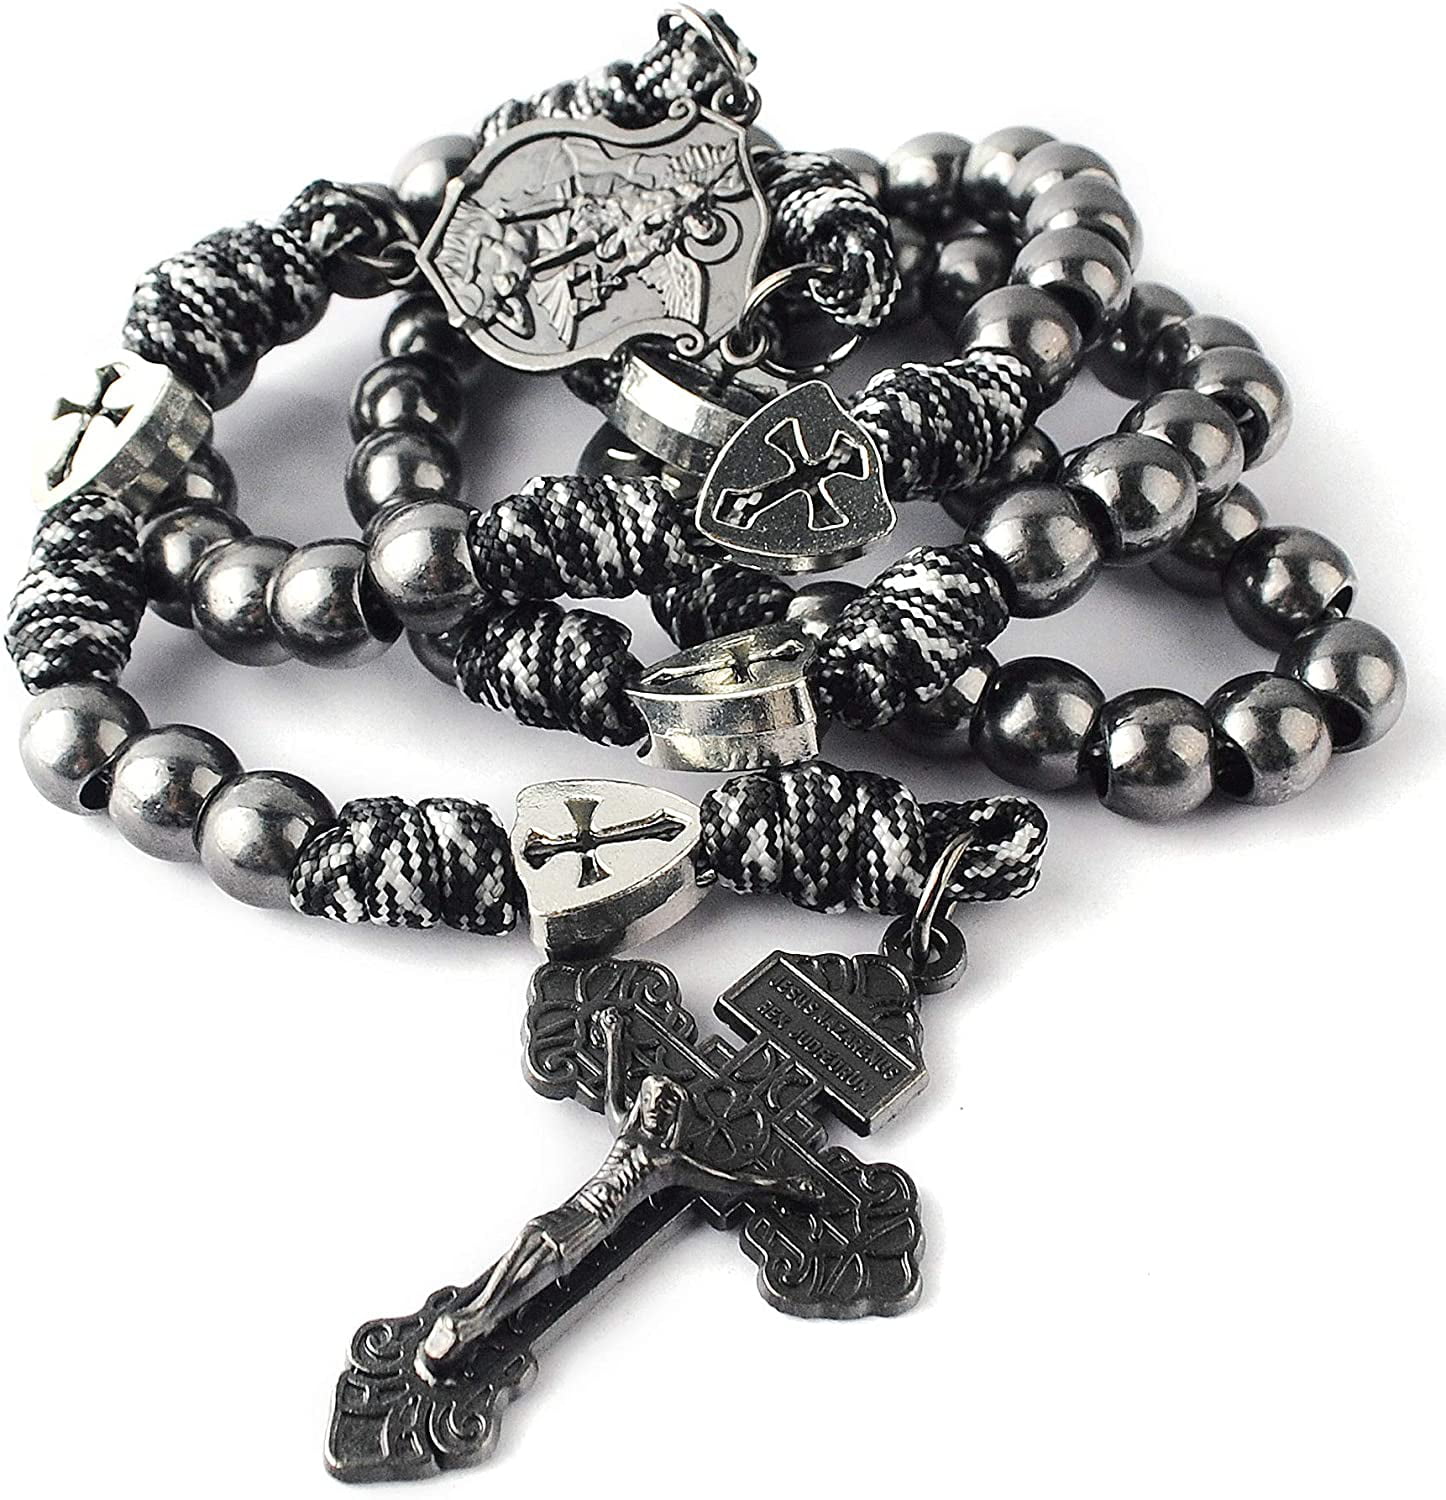 HanlinCC Large and Heavy Antique Bronze Metal Beads Rugged Durable Paracord Rosary Necklace with St.Michael Center Piece and Pardon Crucifix for Men 